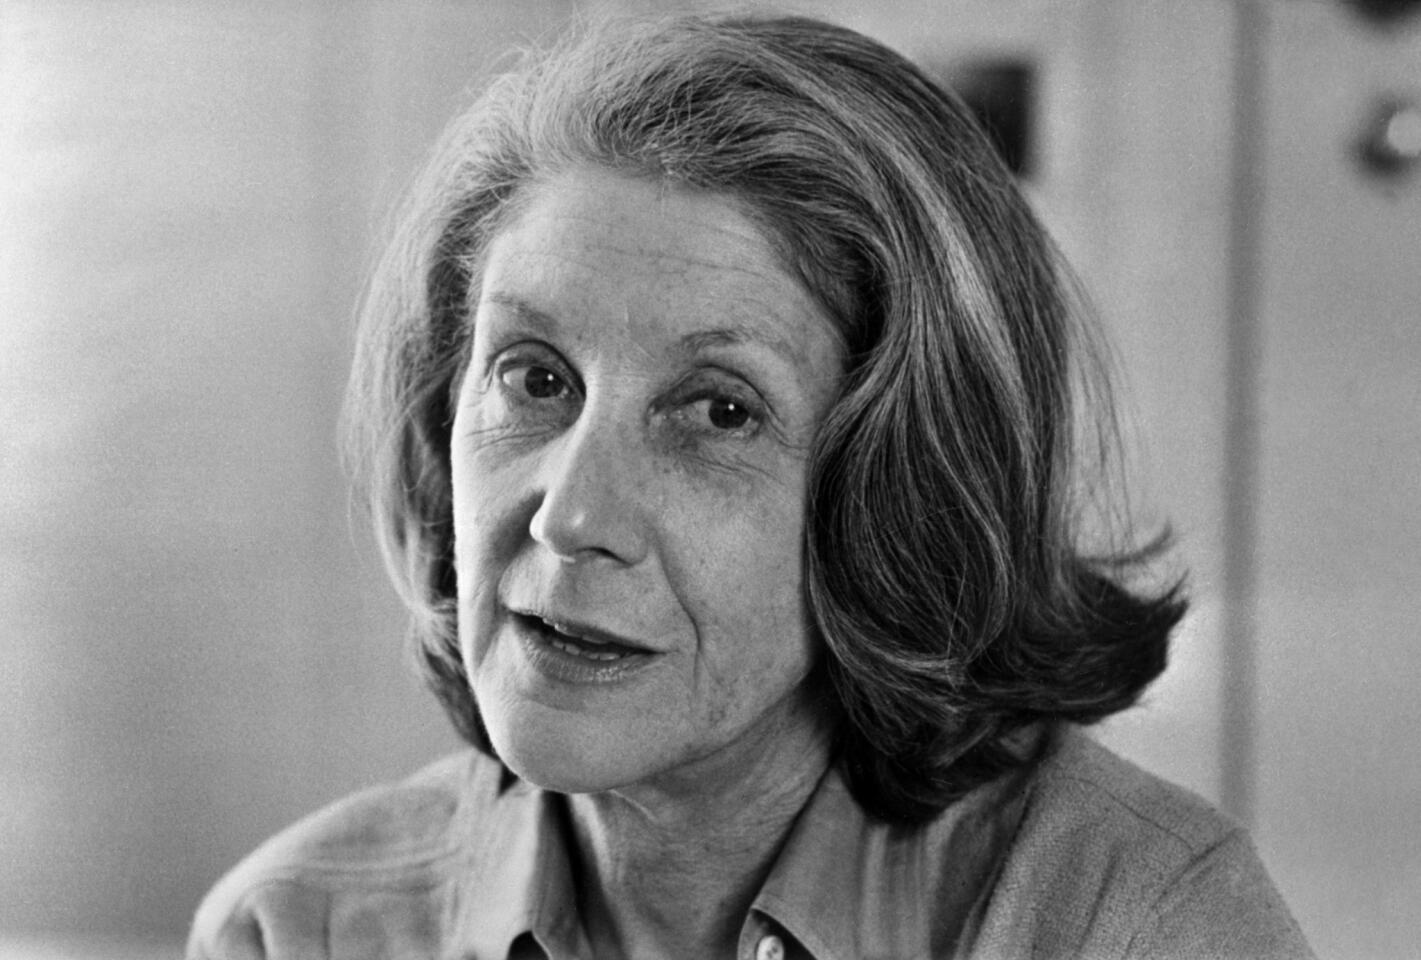 South African writer Nadine Gordimer, who won fame and a Nobel Prize as a chronicler of apartheid, has died at age 90.